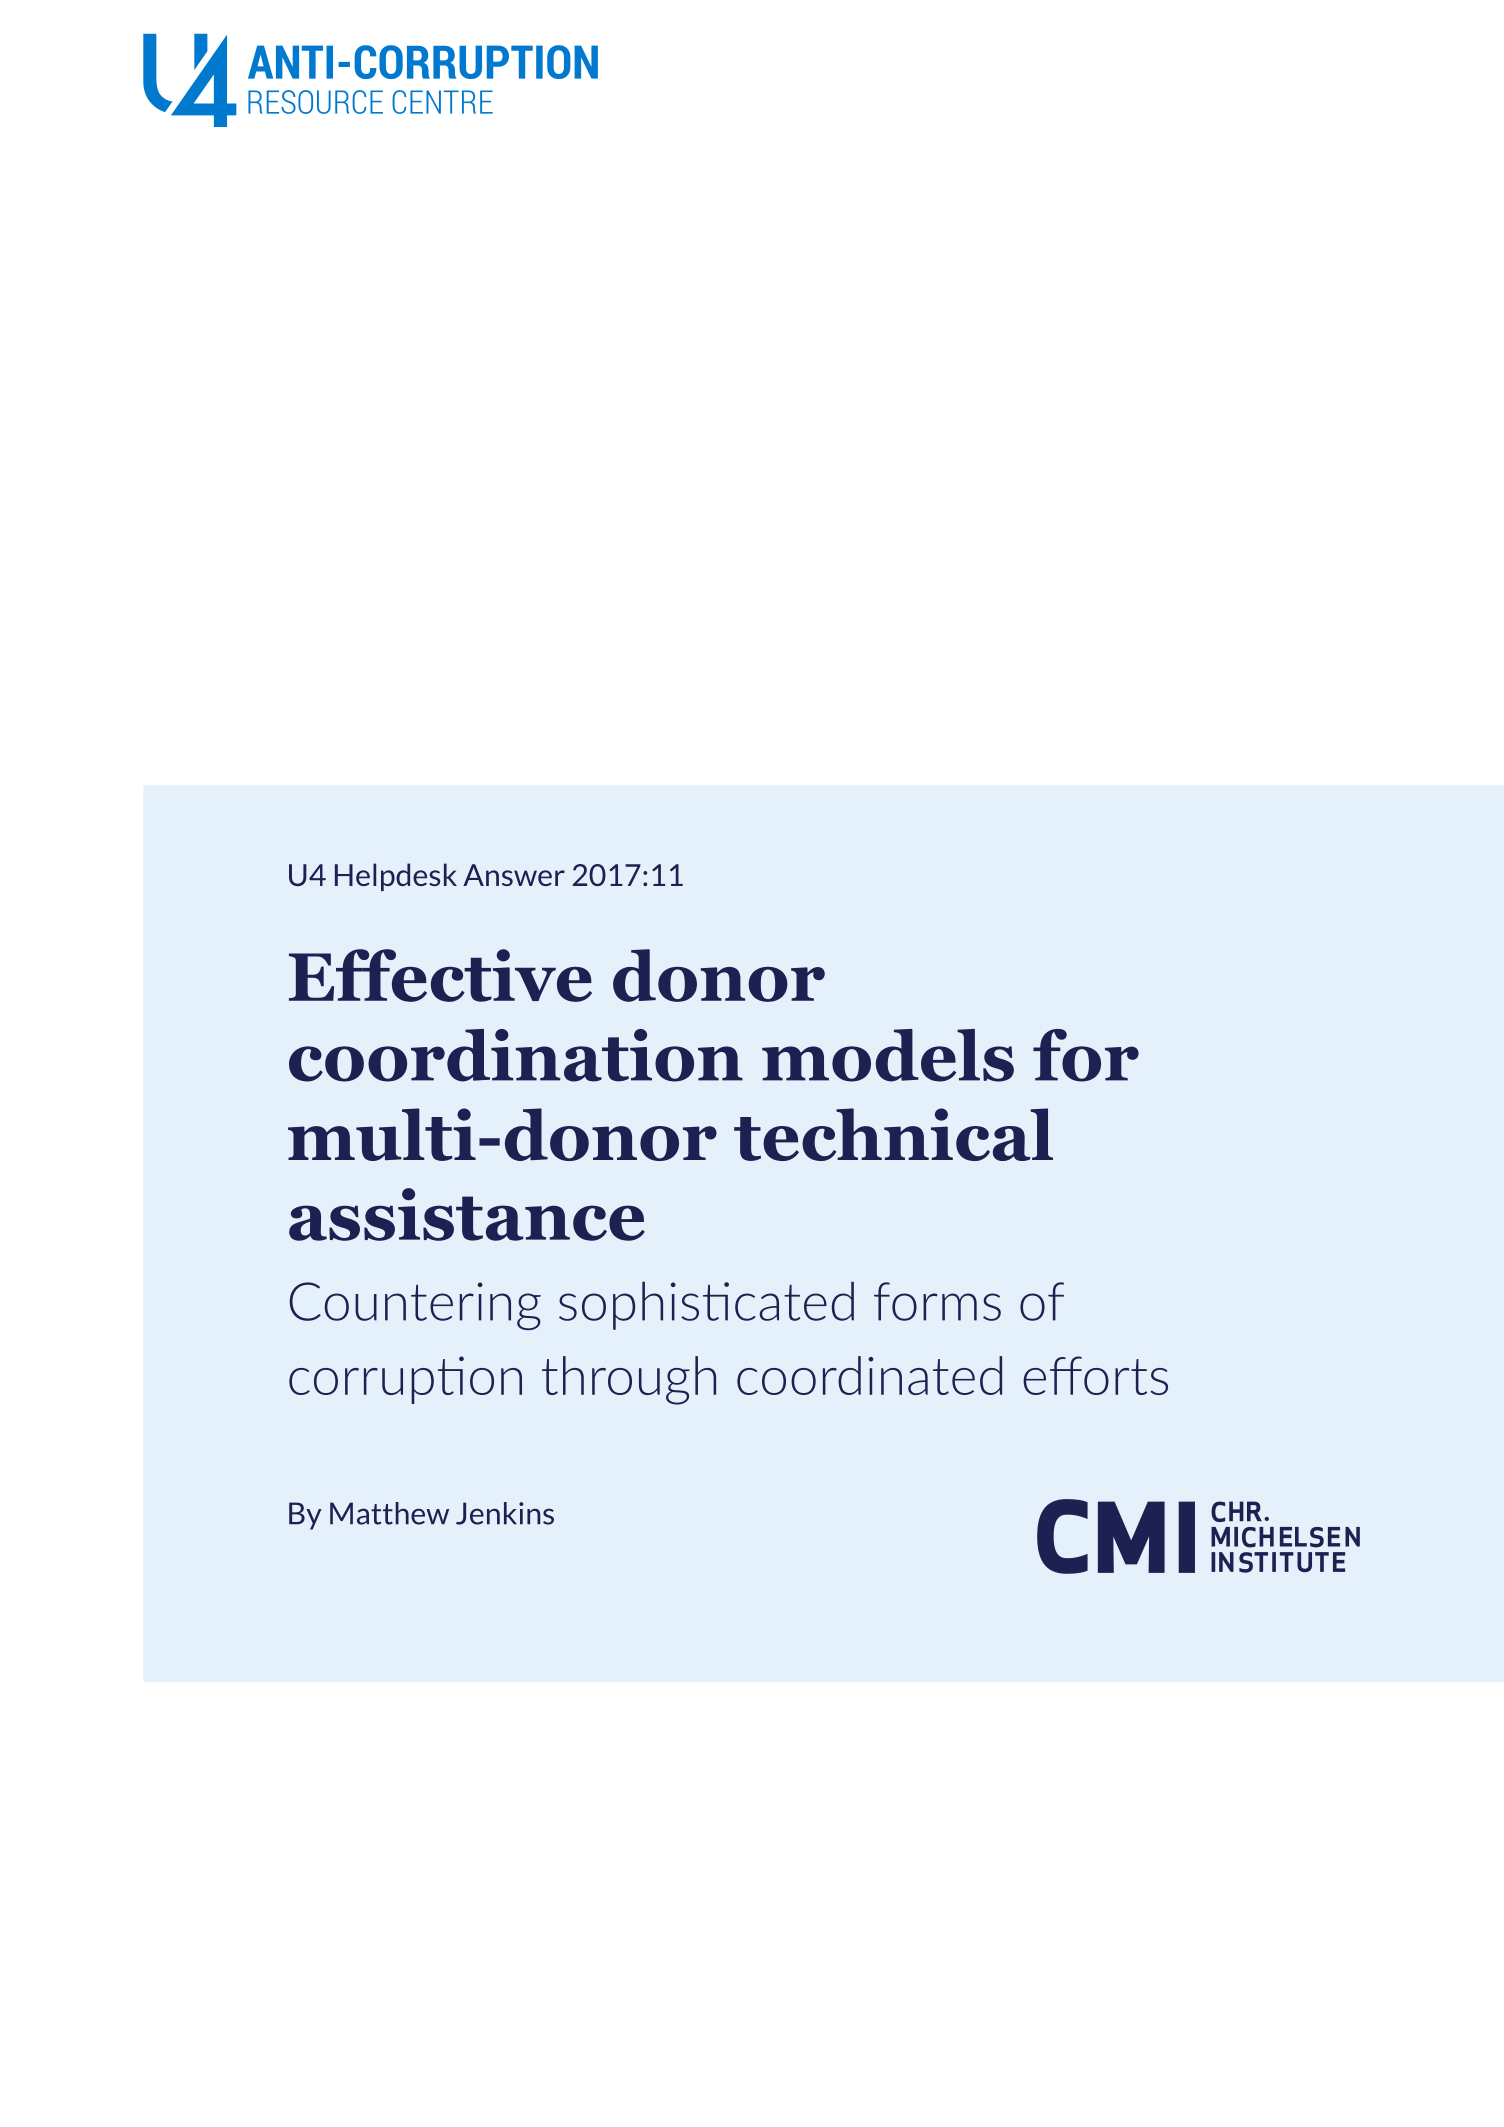 Effective donor coordination models for multi-donor technical assistance